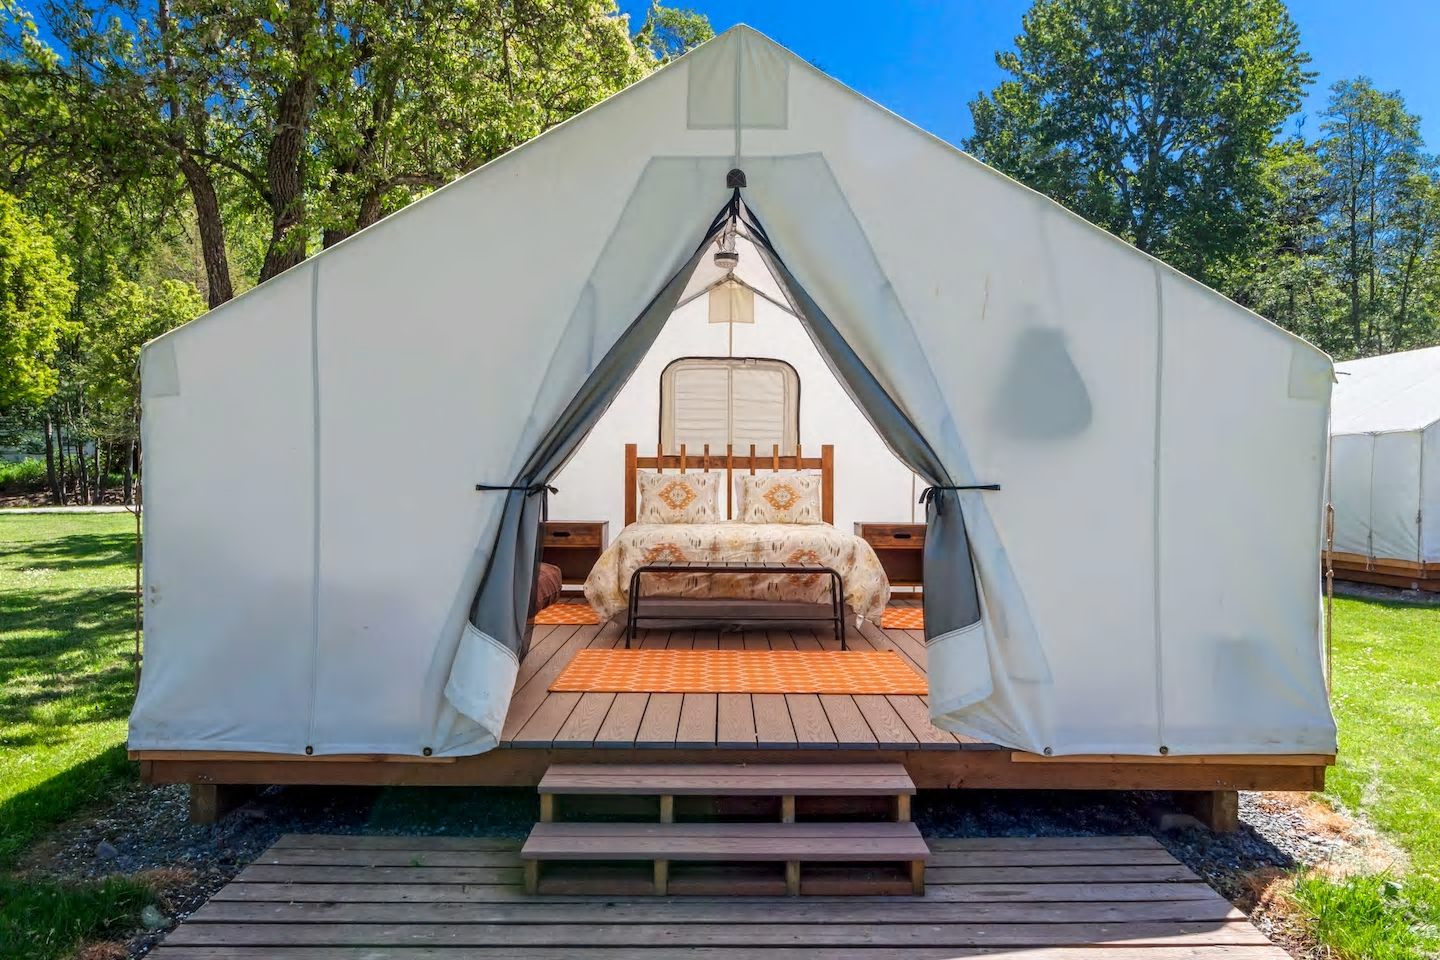 The 19 BEST Glamping Washington Sites For Your Bucket List [2020]